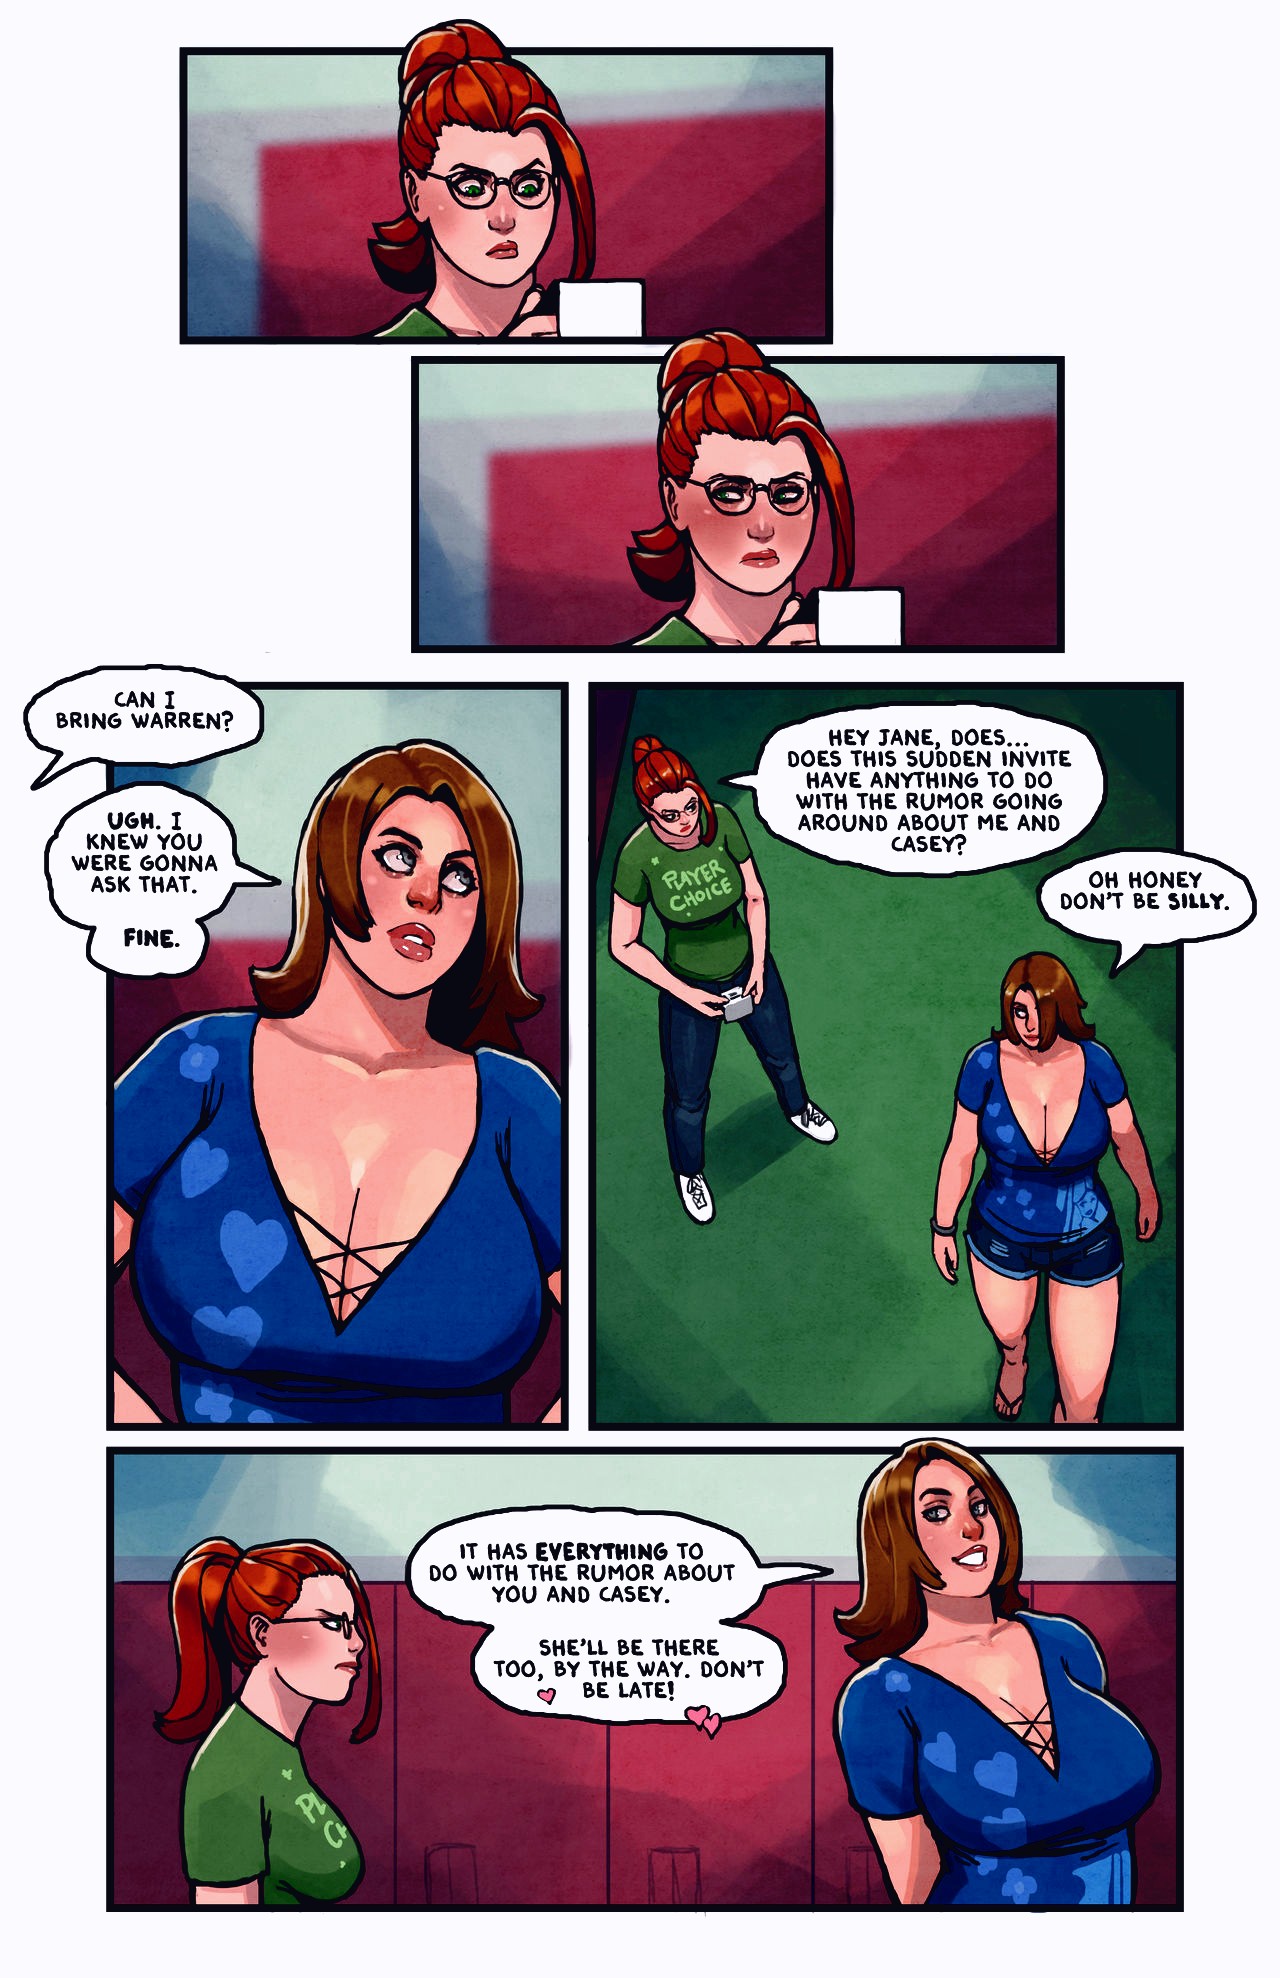 This Romantic World page 055